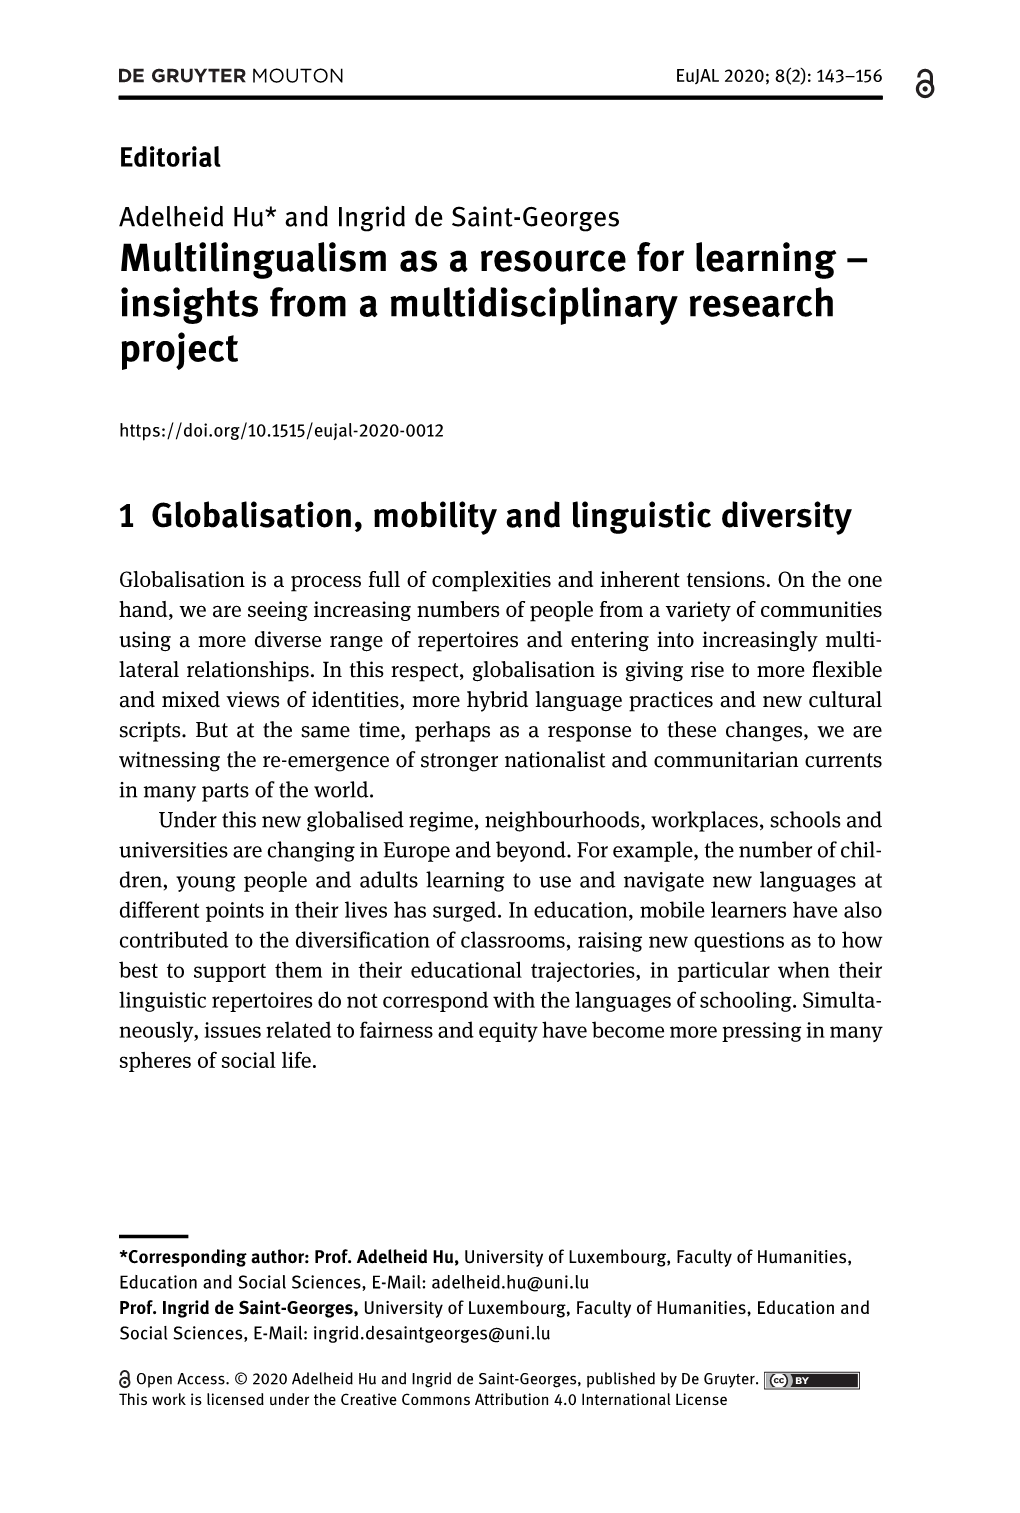 Multilingualism As a Resource for Learning – Insights from a Multidisciplinary Research Project